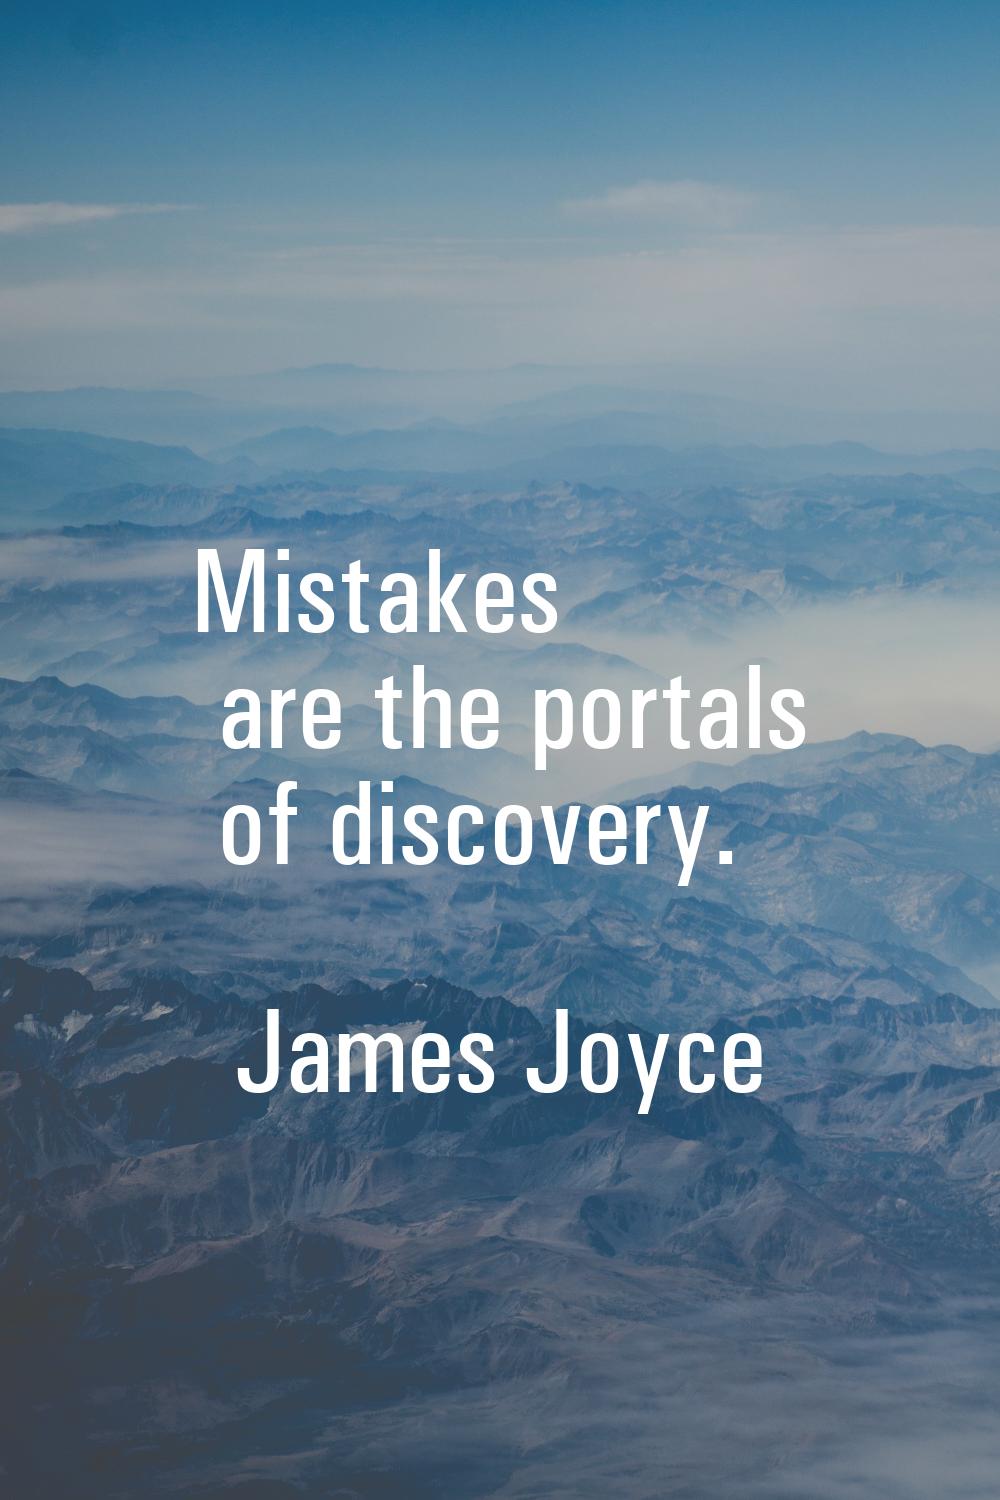 Mistakes are the portals of discovery.